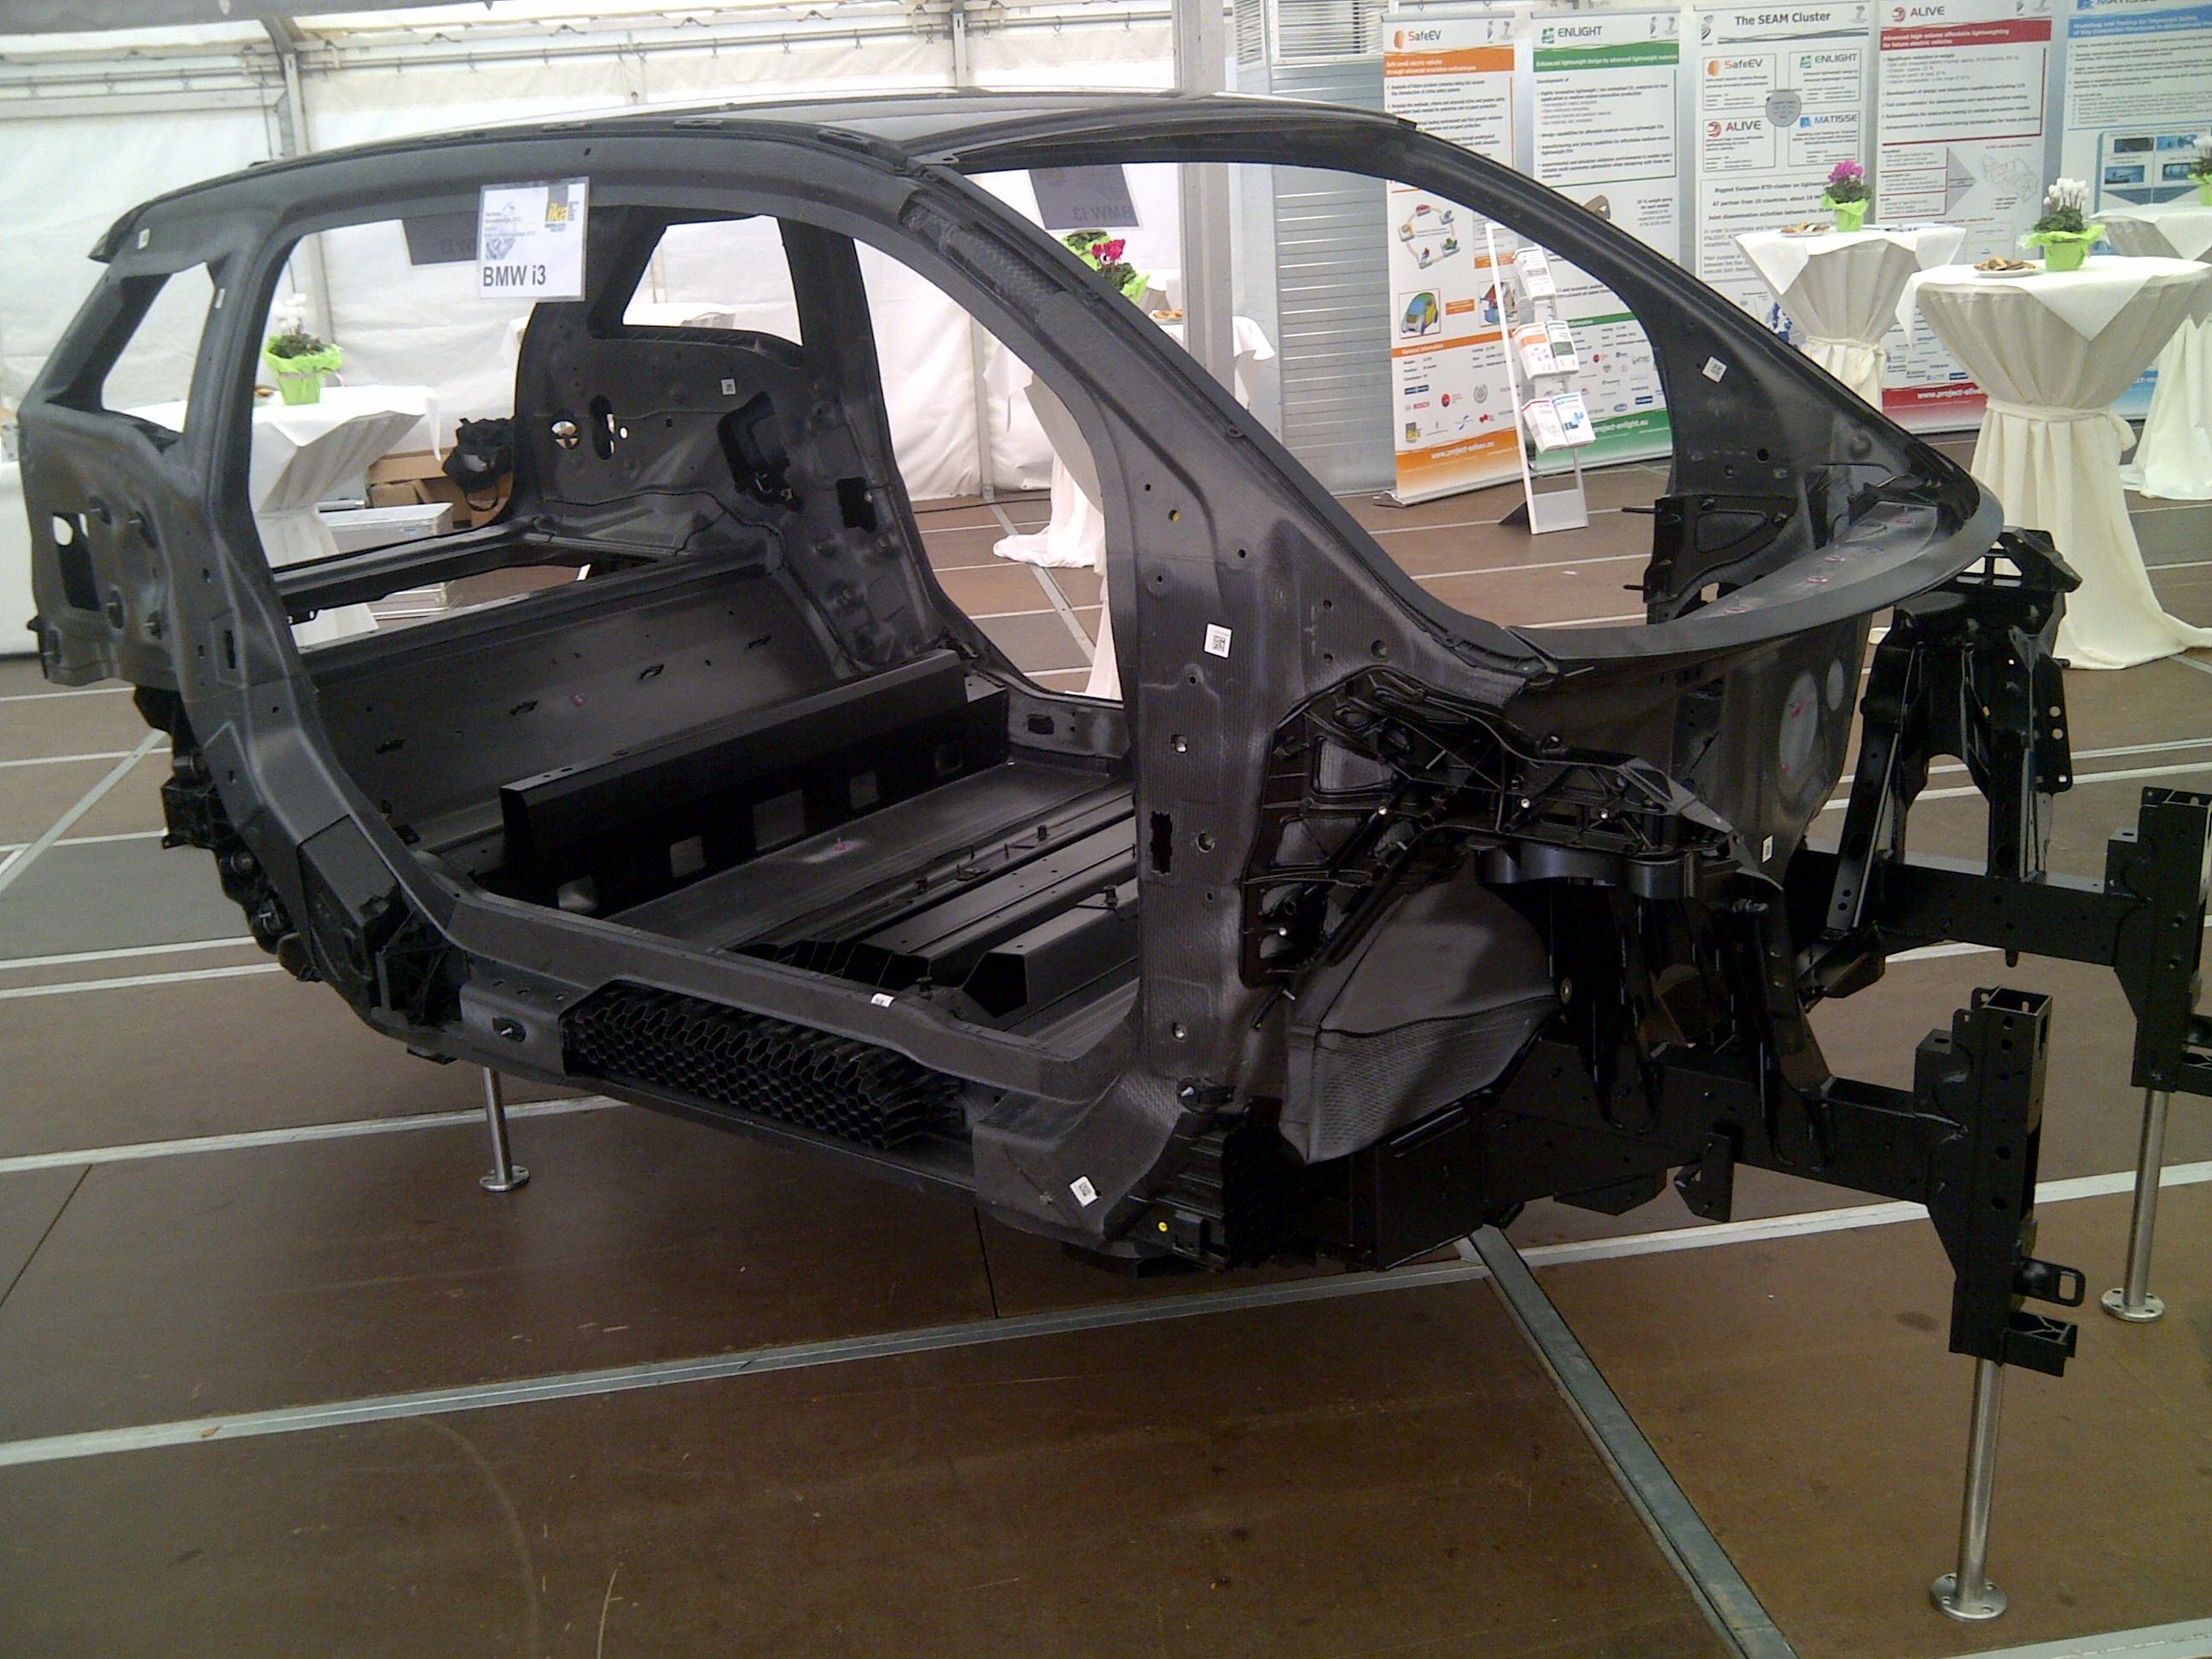 The full CFRP body of the BMW i3 at ABED 2013 (Photo © Bax & Willems)